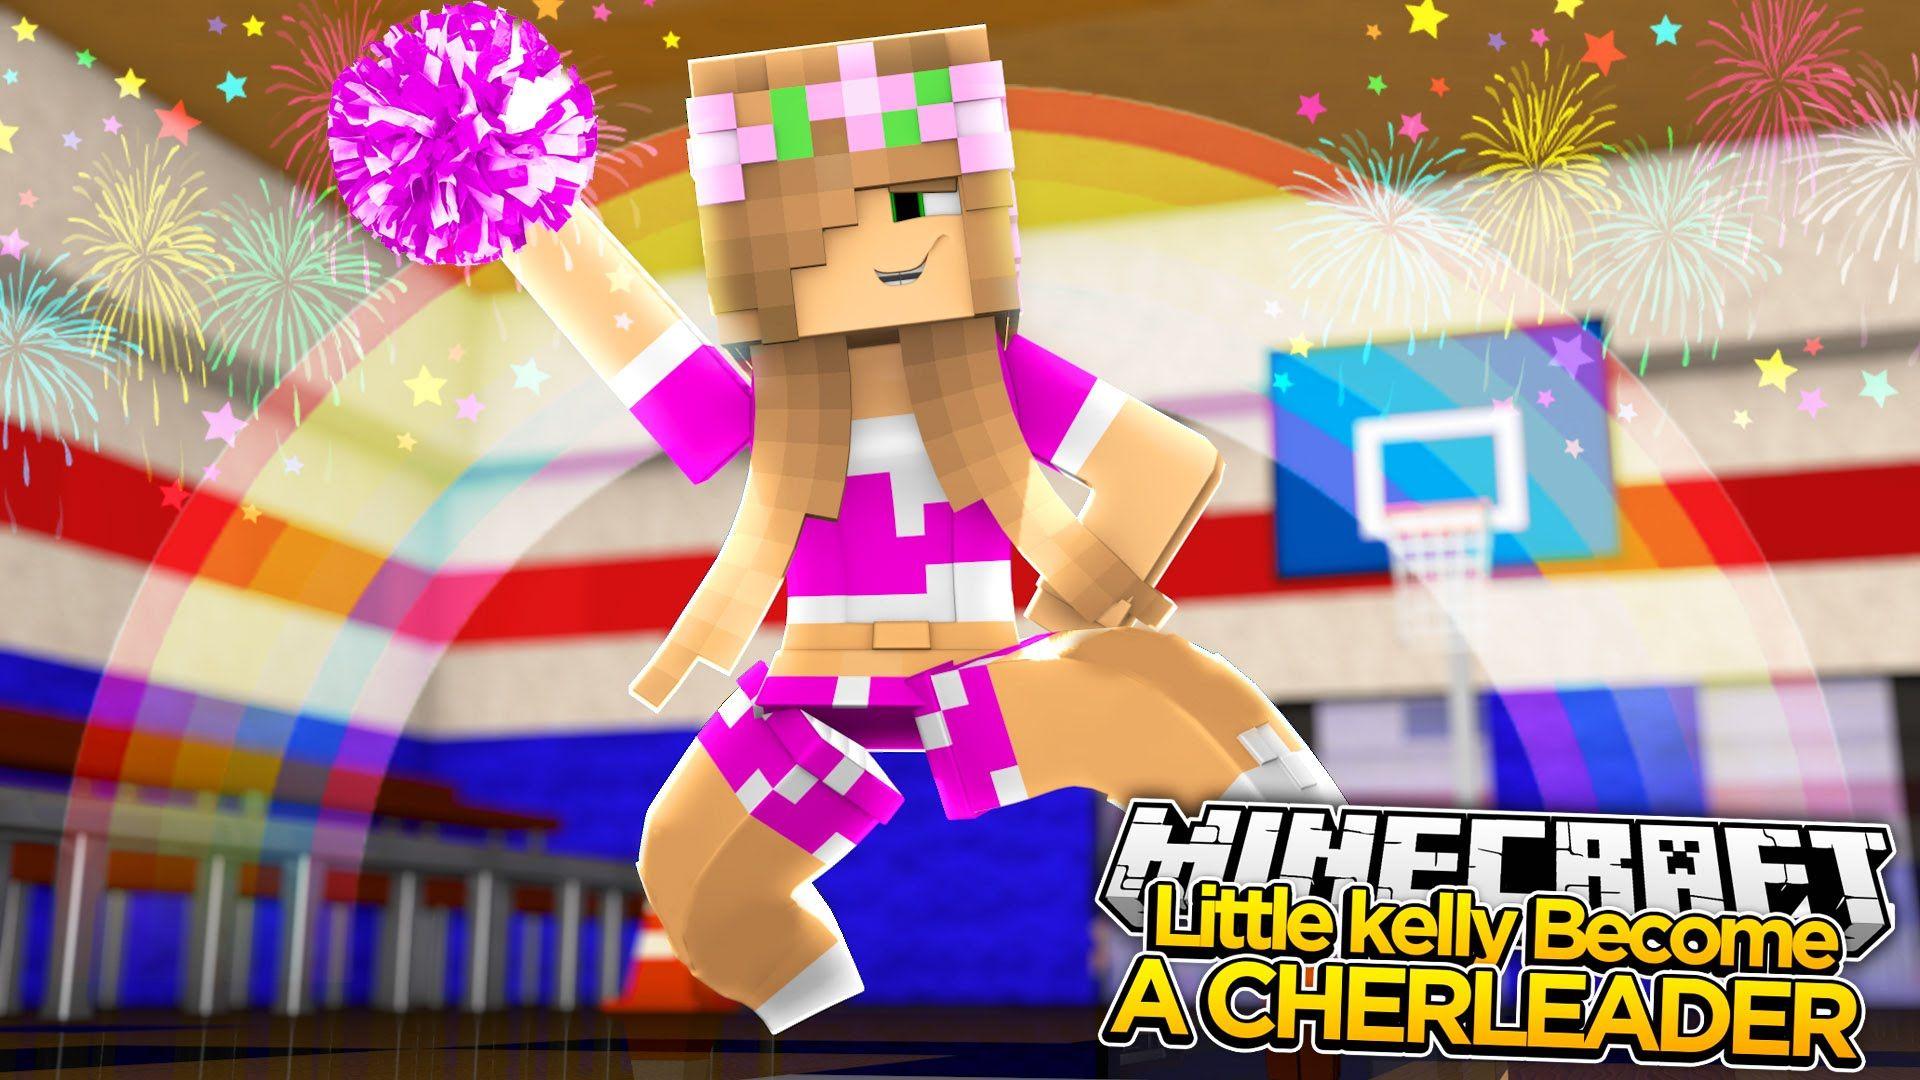 Minecraft KELLY BECOMES A CHEERLEADER!